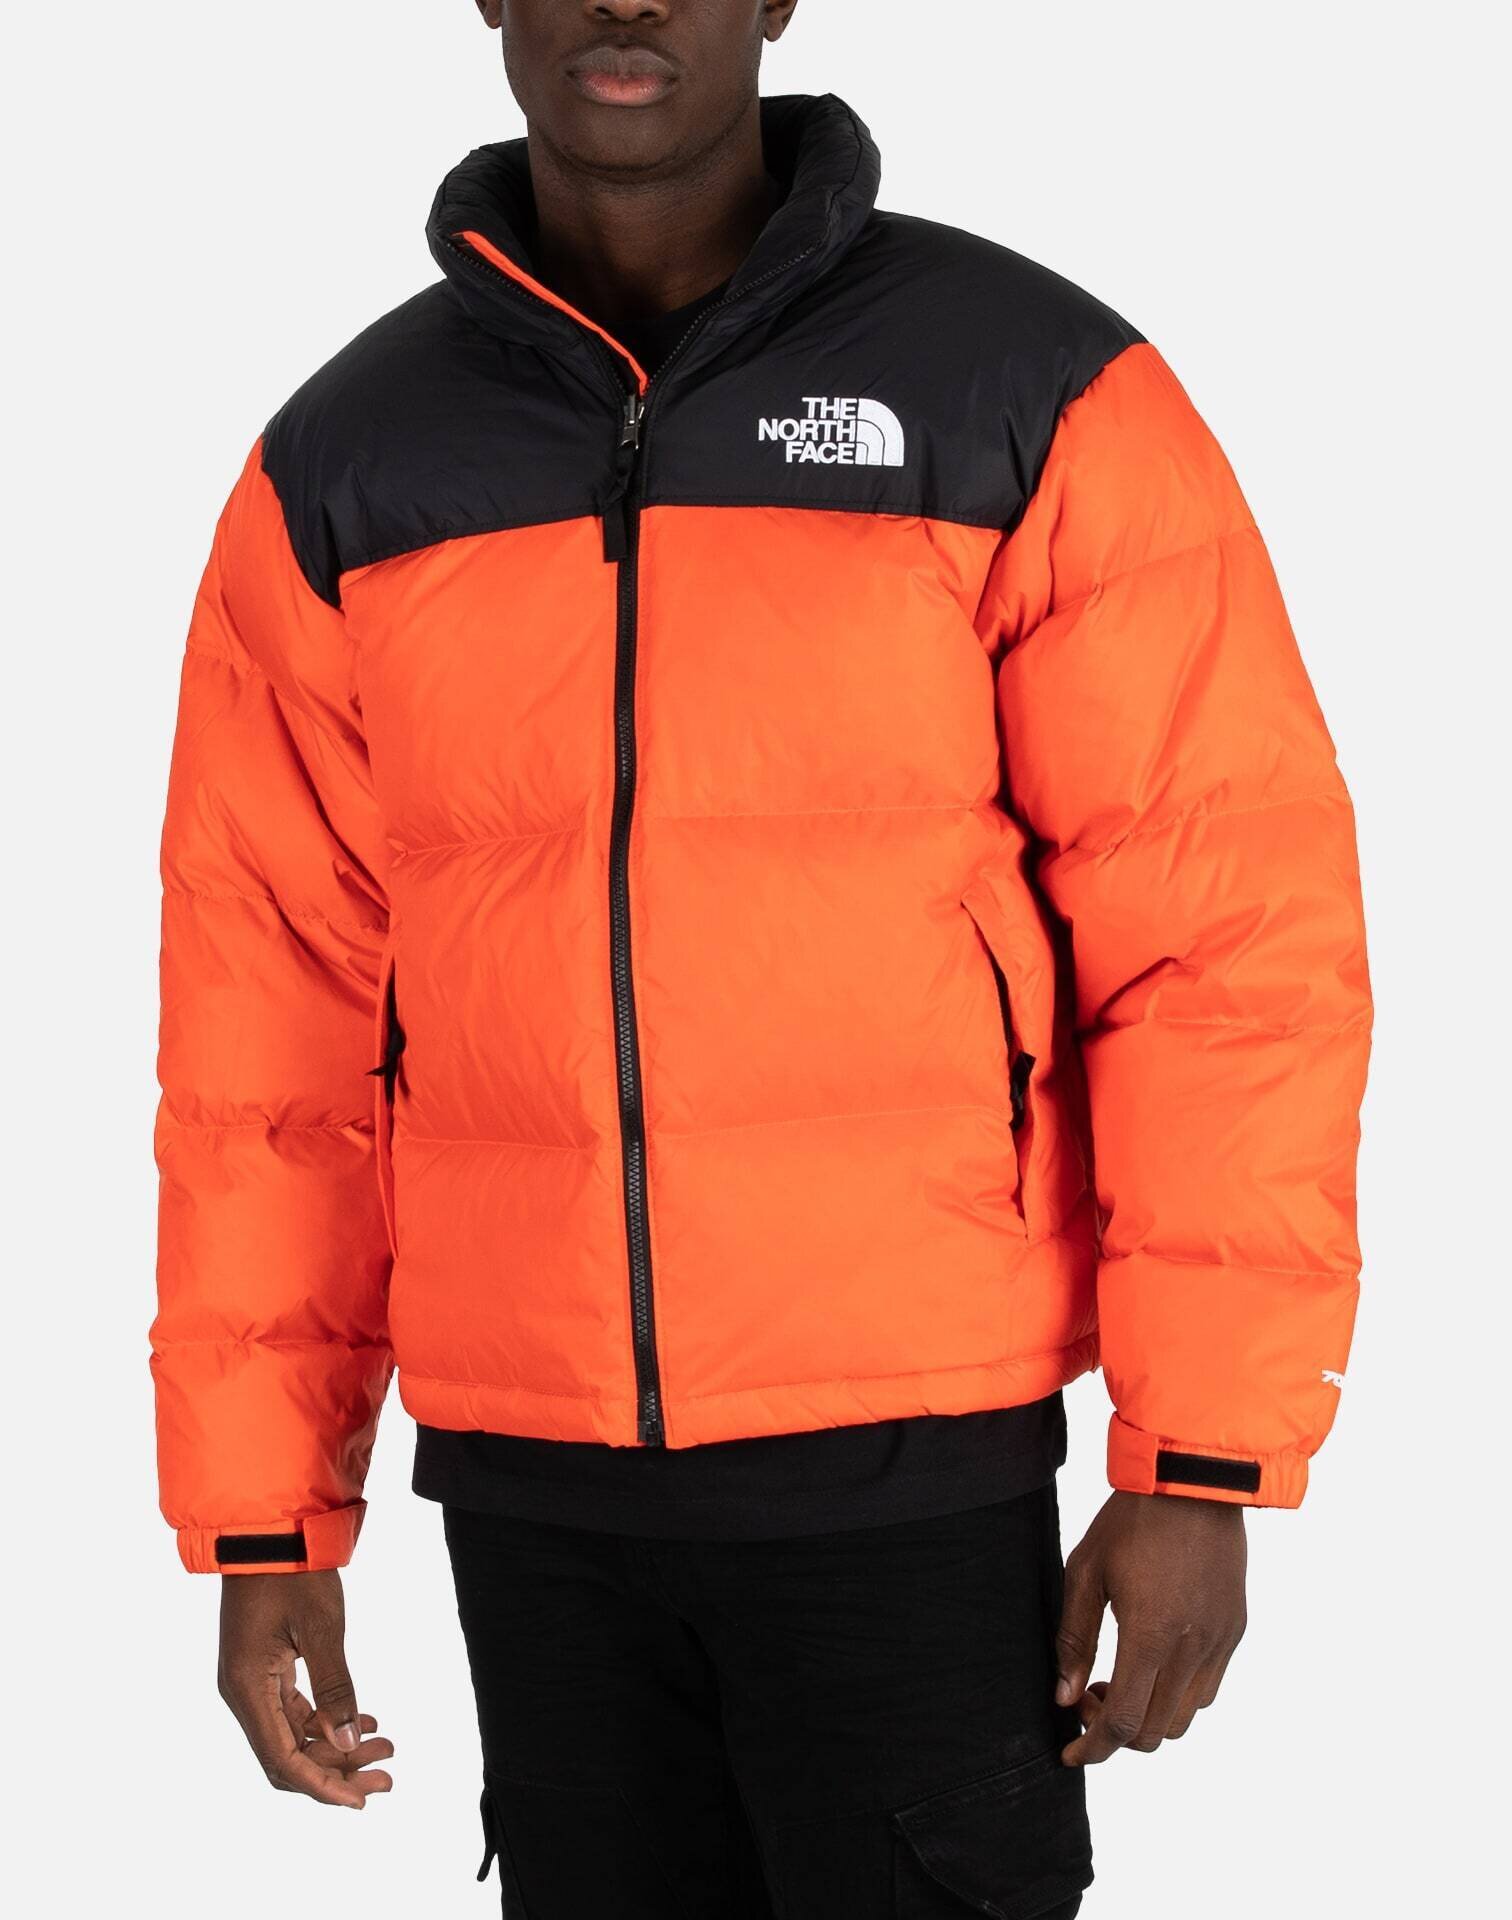 Now Available: The North Face 1996 Retro Nupste Jacket 